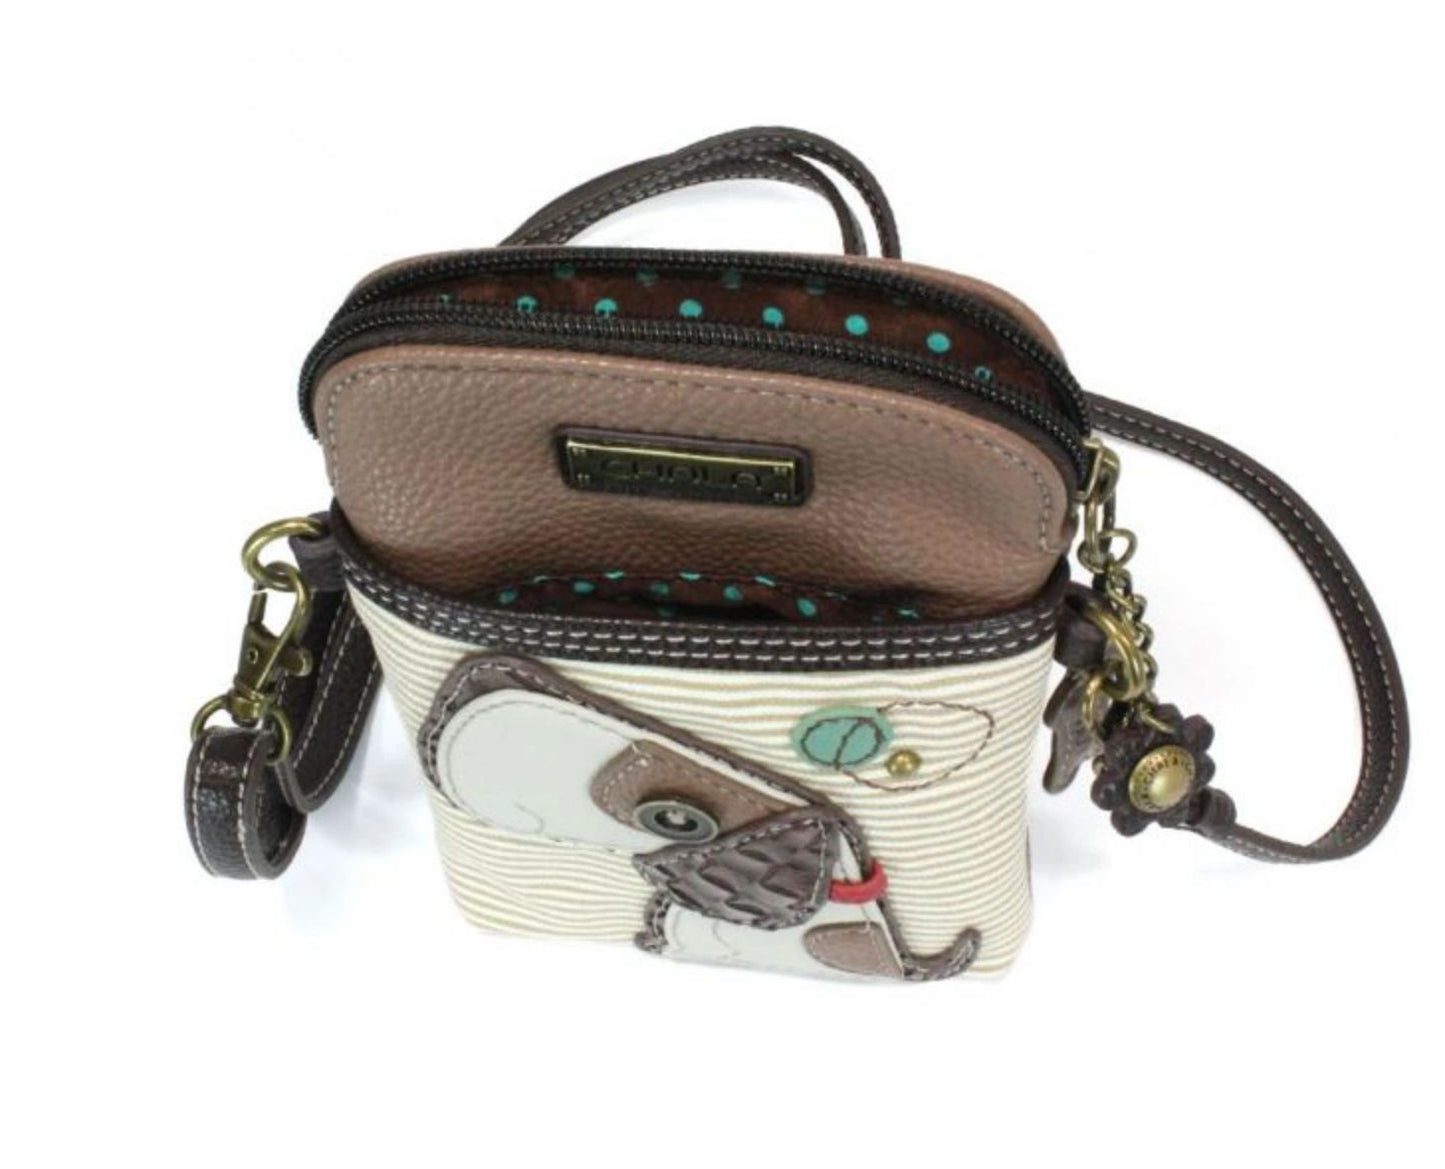 Chala Cell Phone XBody Bag - Striped Toffee Dog